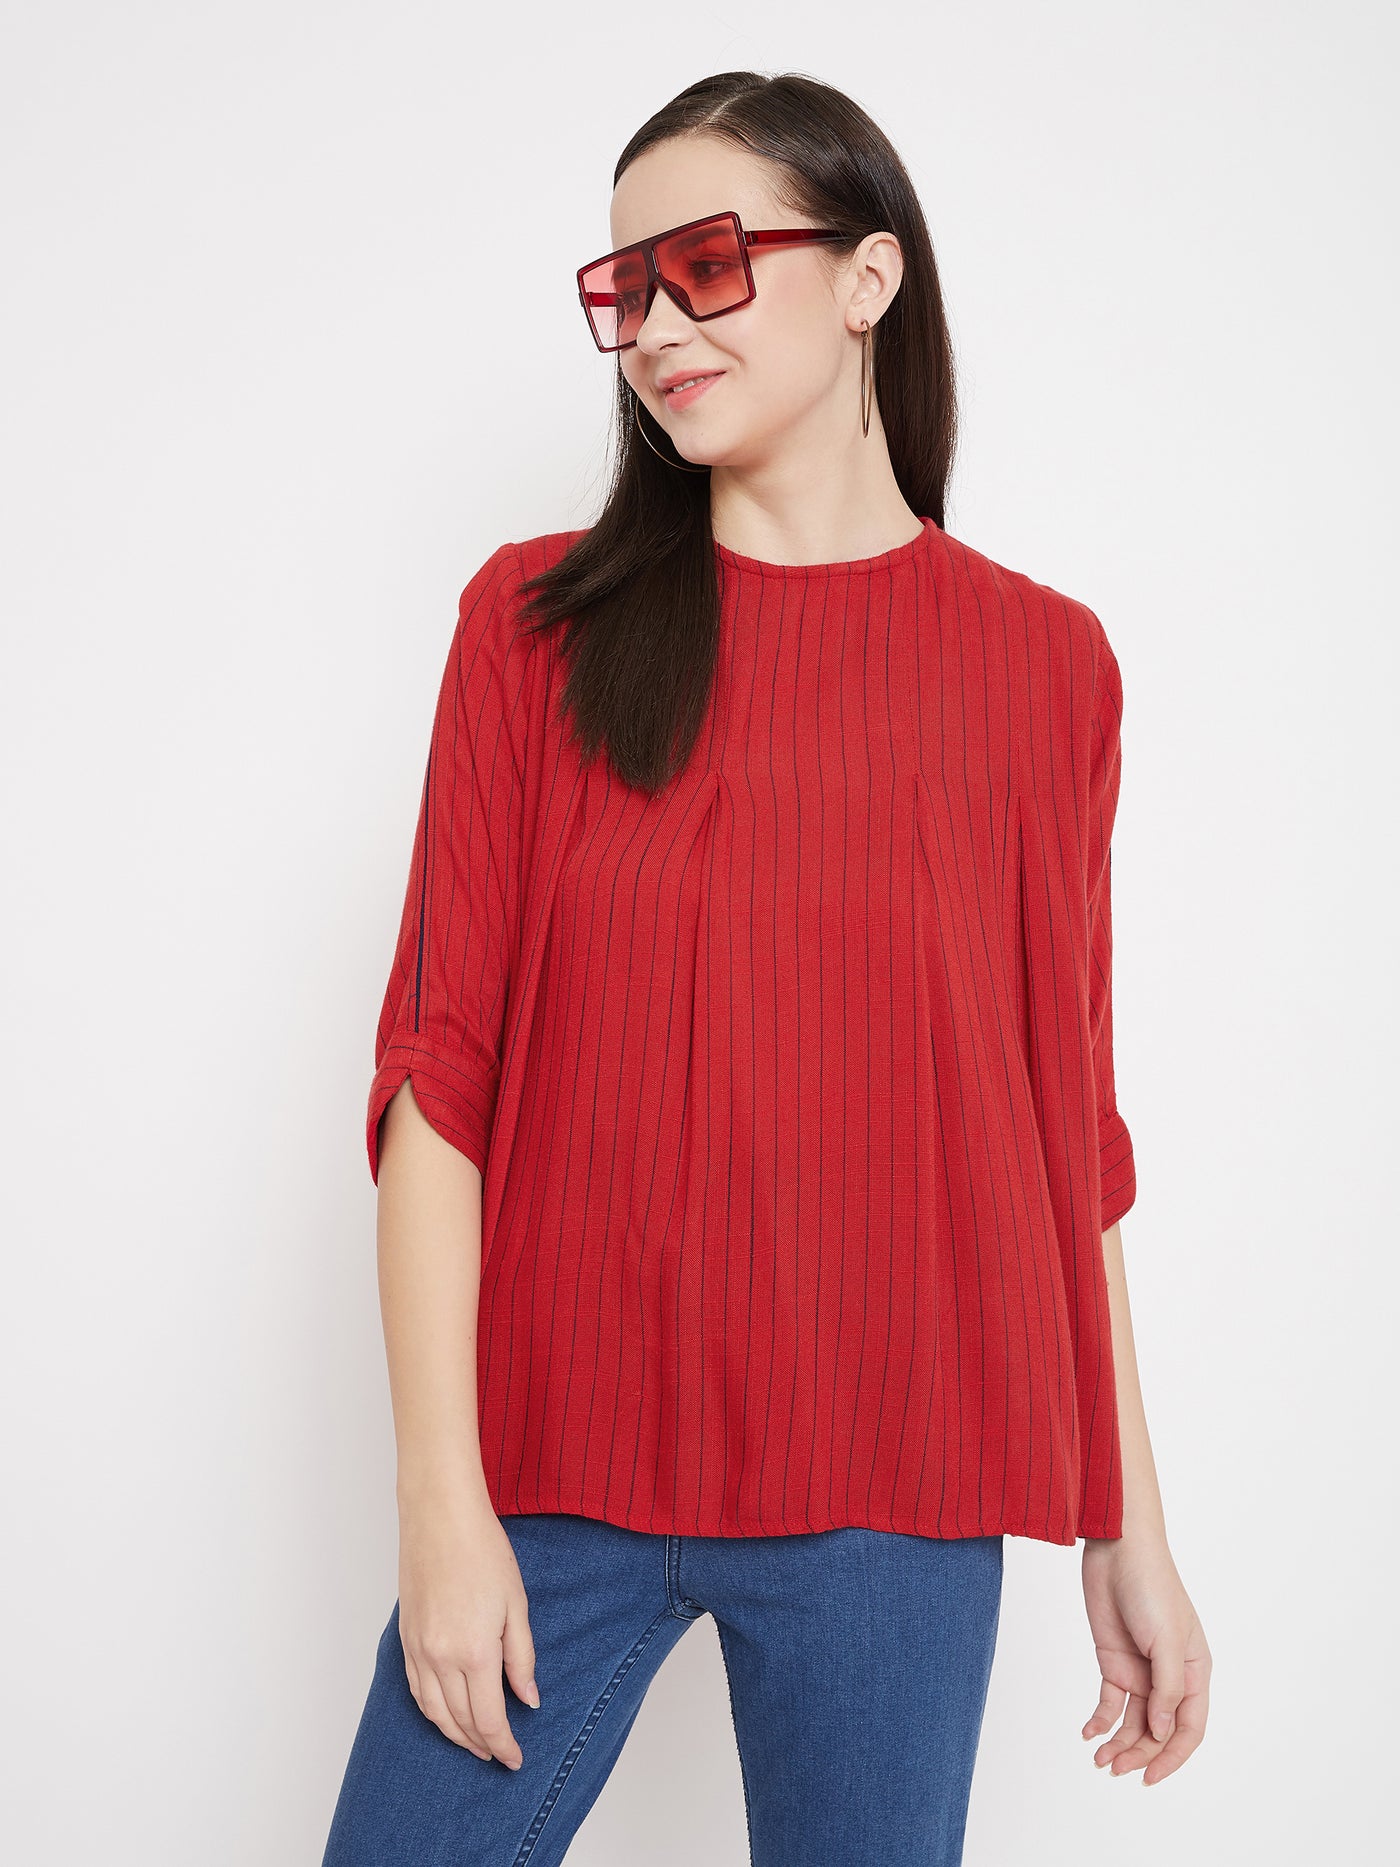 Red Striped Top - Women Tops